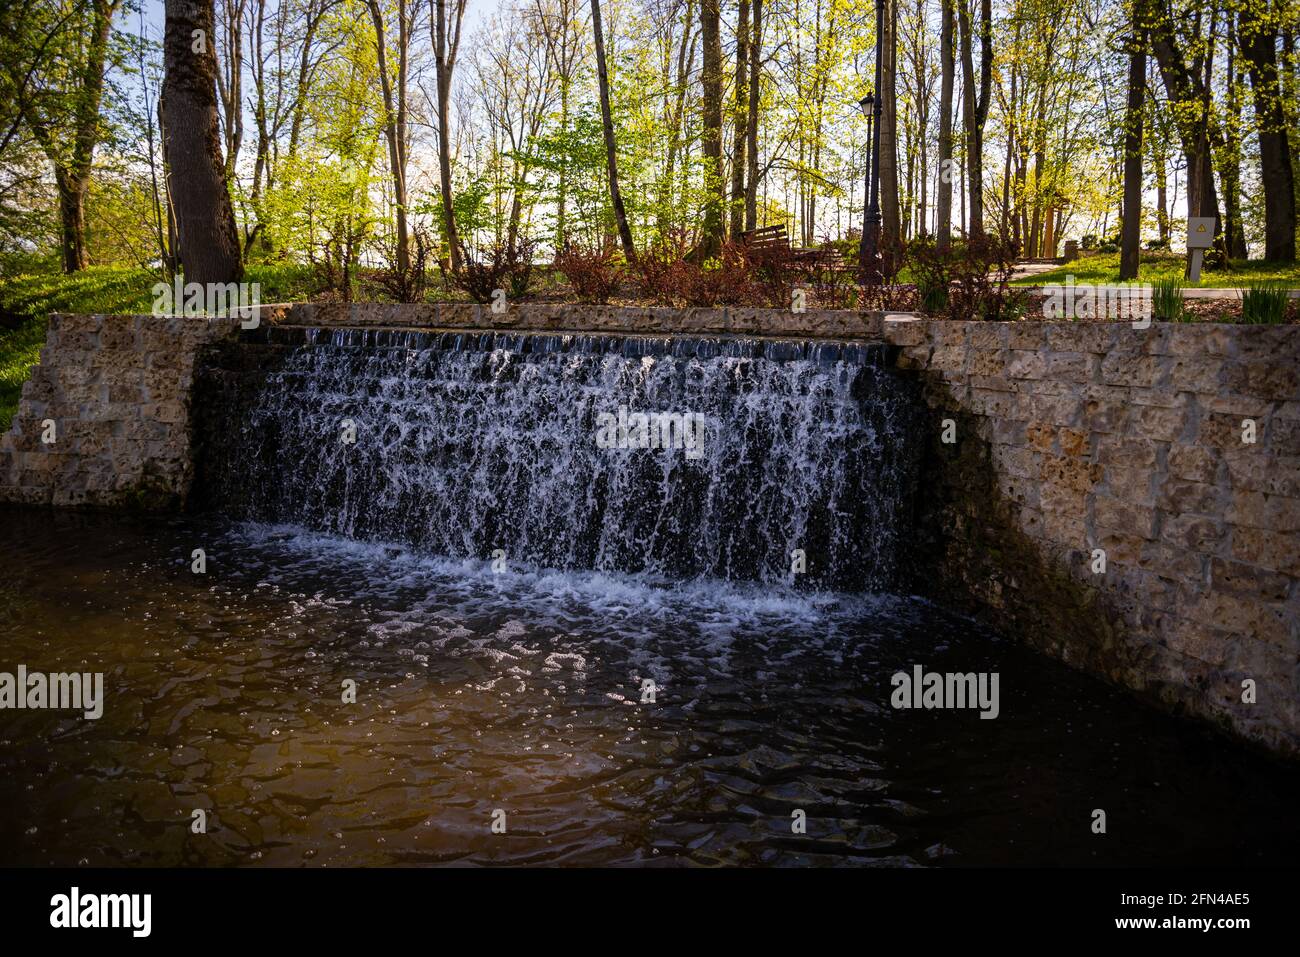 Beautiful waterfall in the park. the waterfall flows from a stone wall structure into a pond. Stock Photo